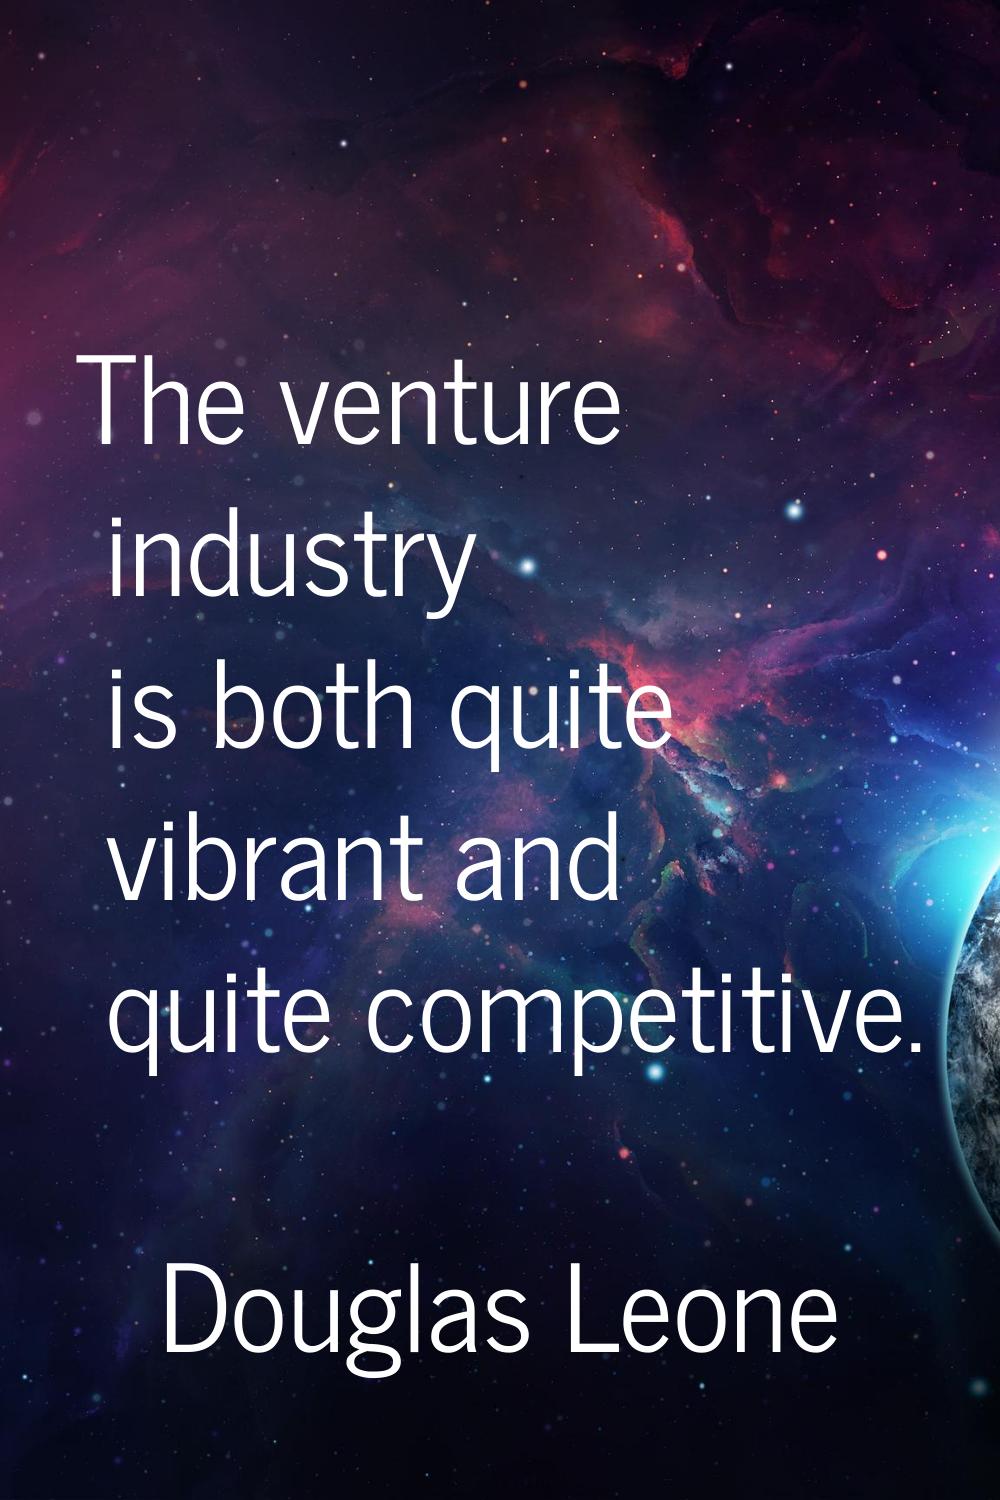 The venture industry is both quite vibrant and quite competitive.